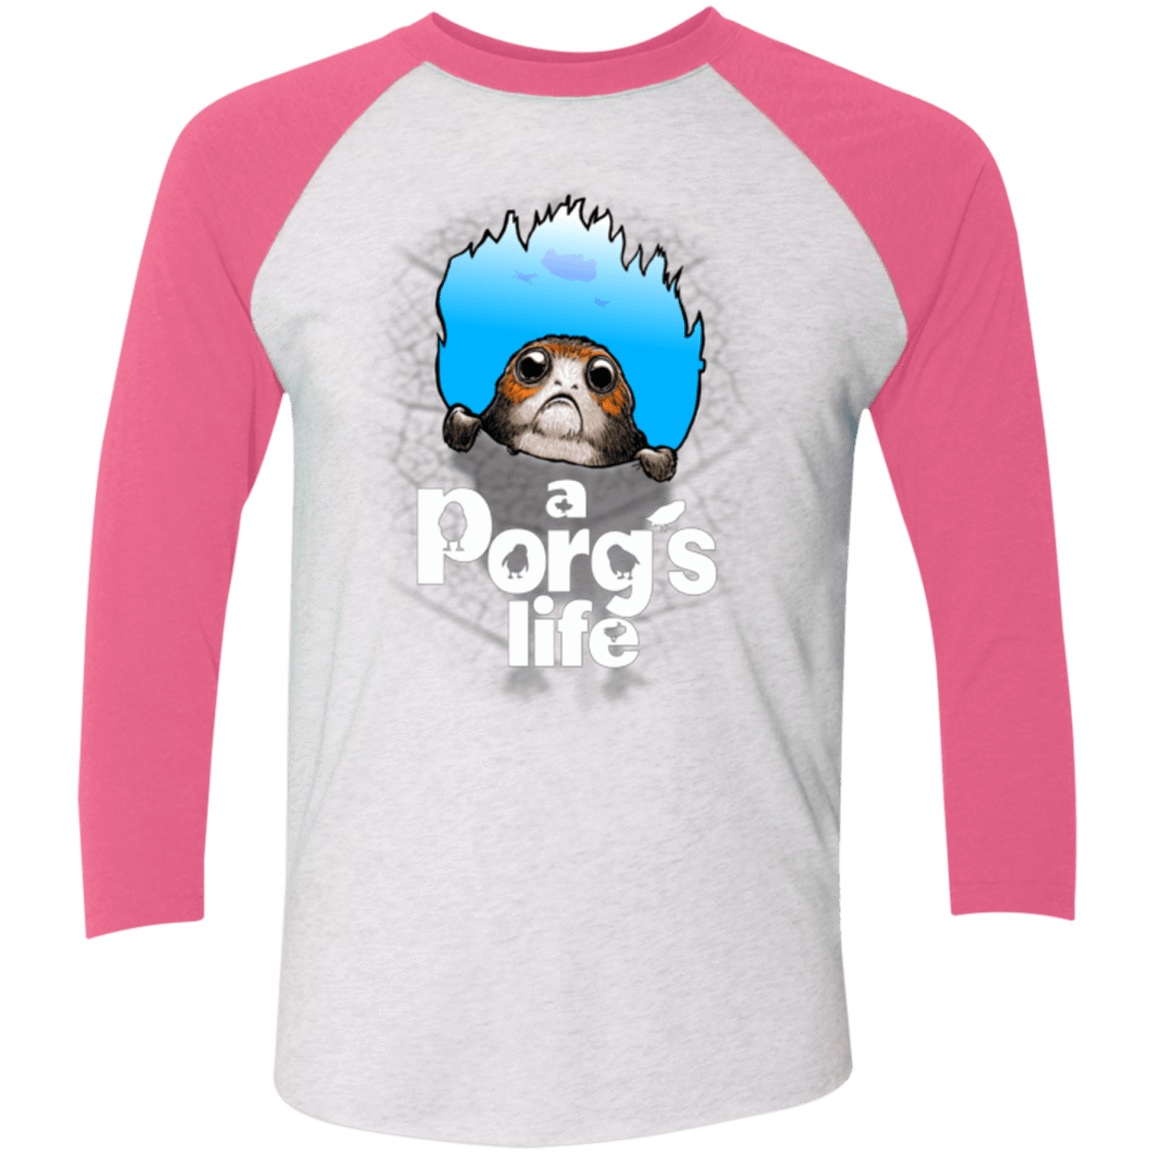 T-Shirts Heather White/Vintage Pink / X-Small A Porgs Life Men's Triblend 3/4 Sleeve